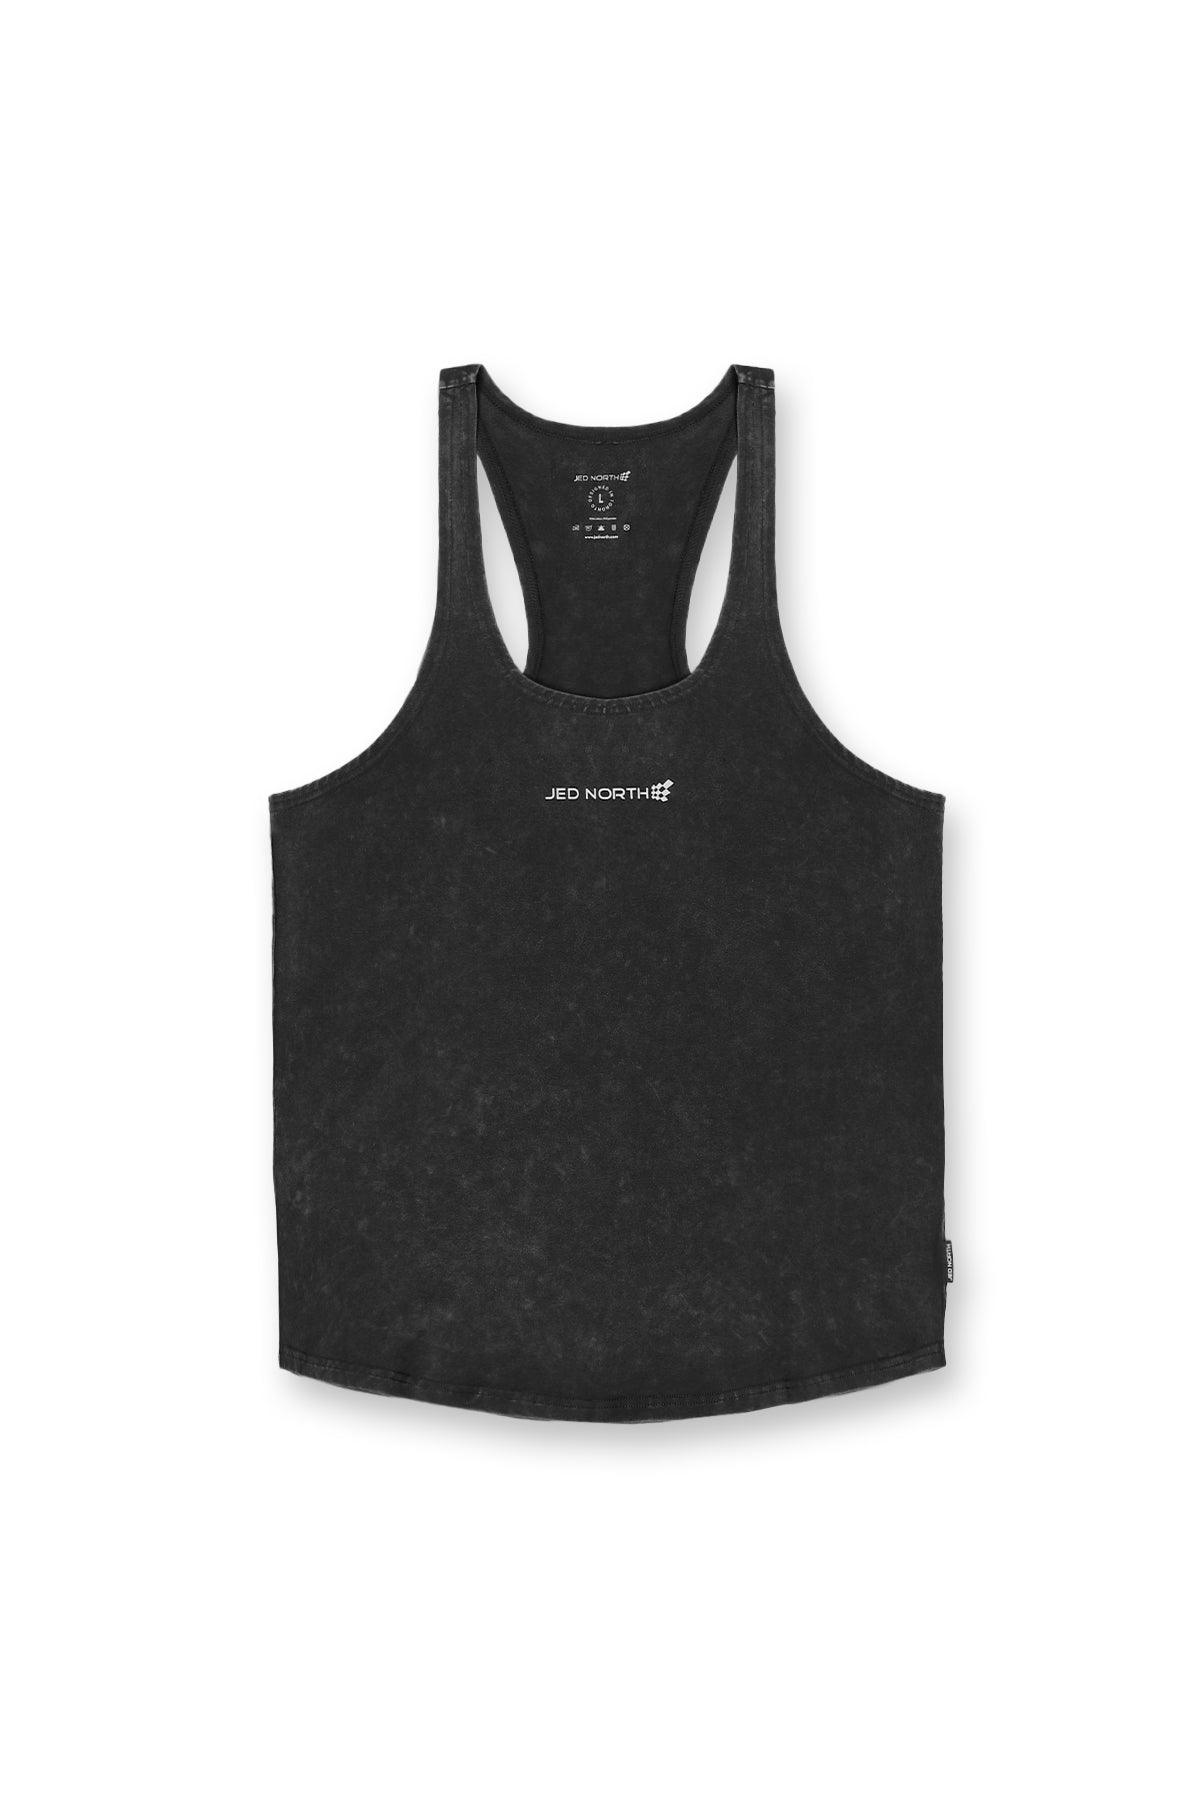 Workout Tank Tops for Men | Bodybuilding & Fitness Gym Wear | Jed North